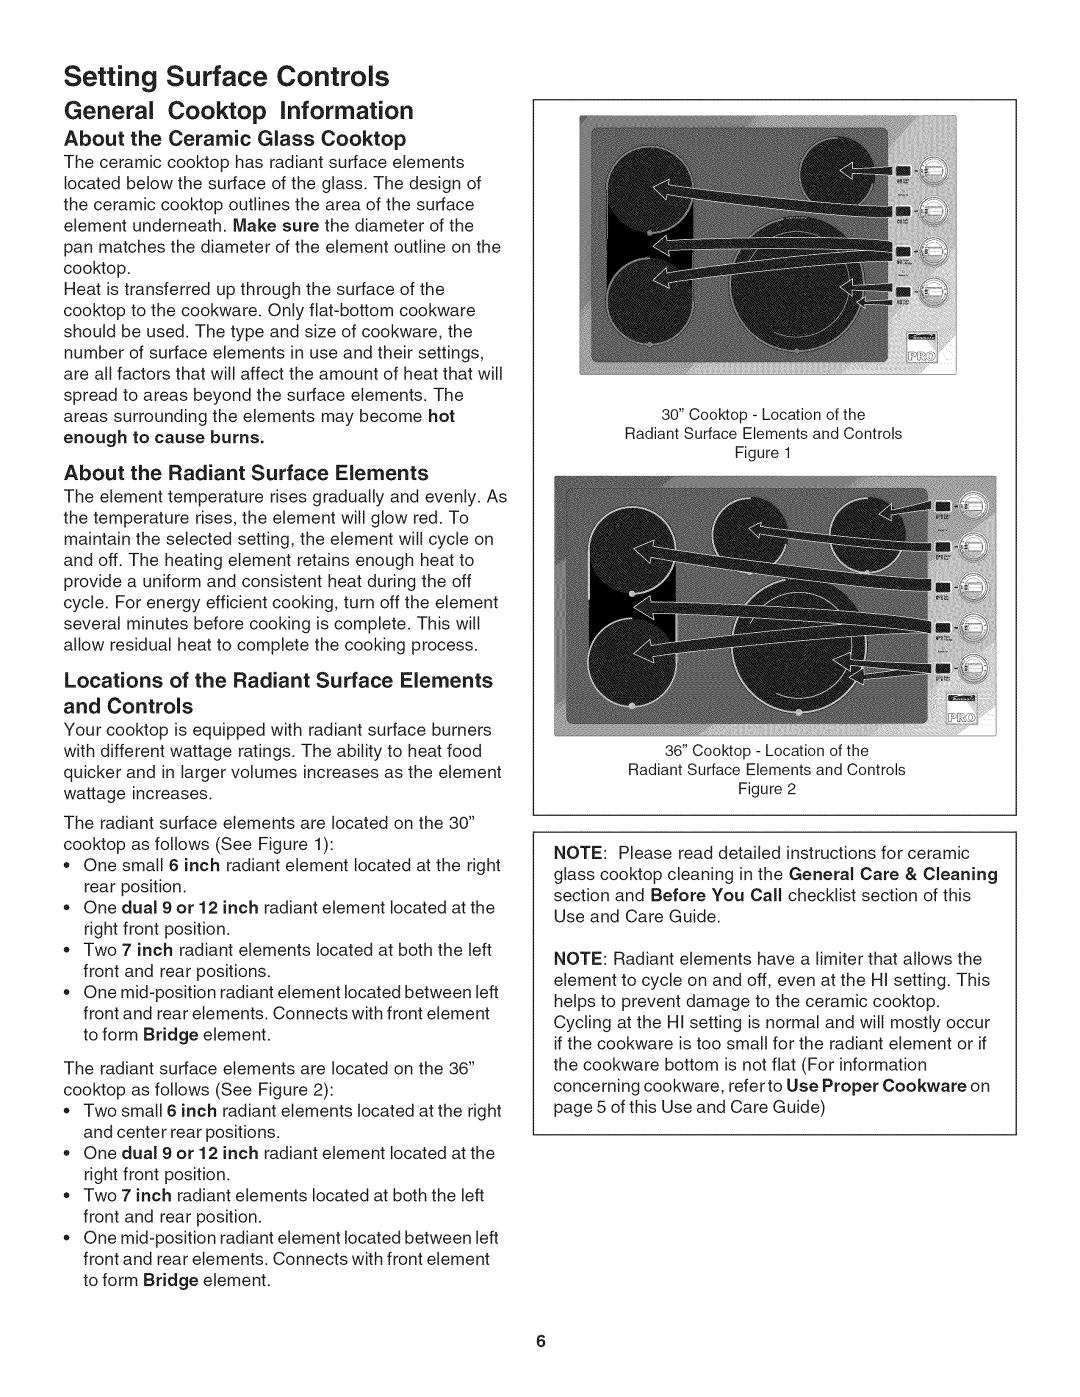 Kenmore 790.4056 Setting Surface Controls, General Cooktop information, About the Ceramic Glass Cooktop, and Controls 